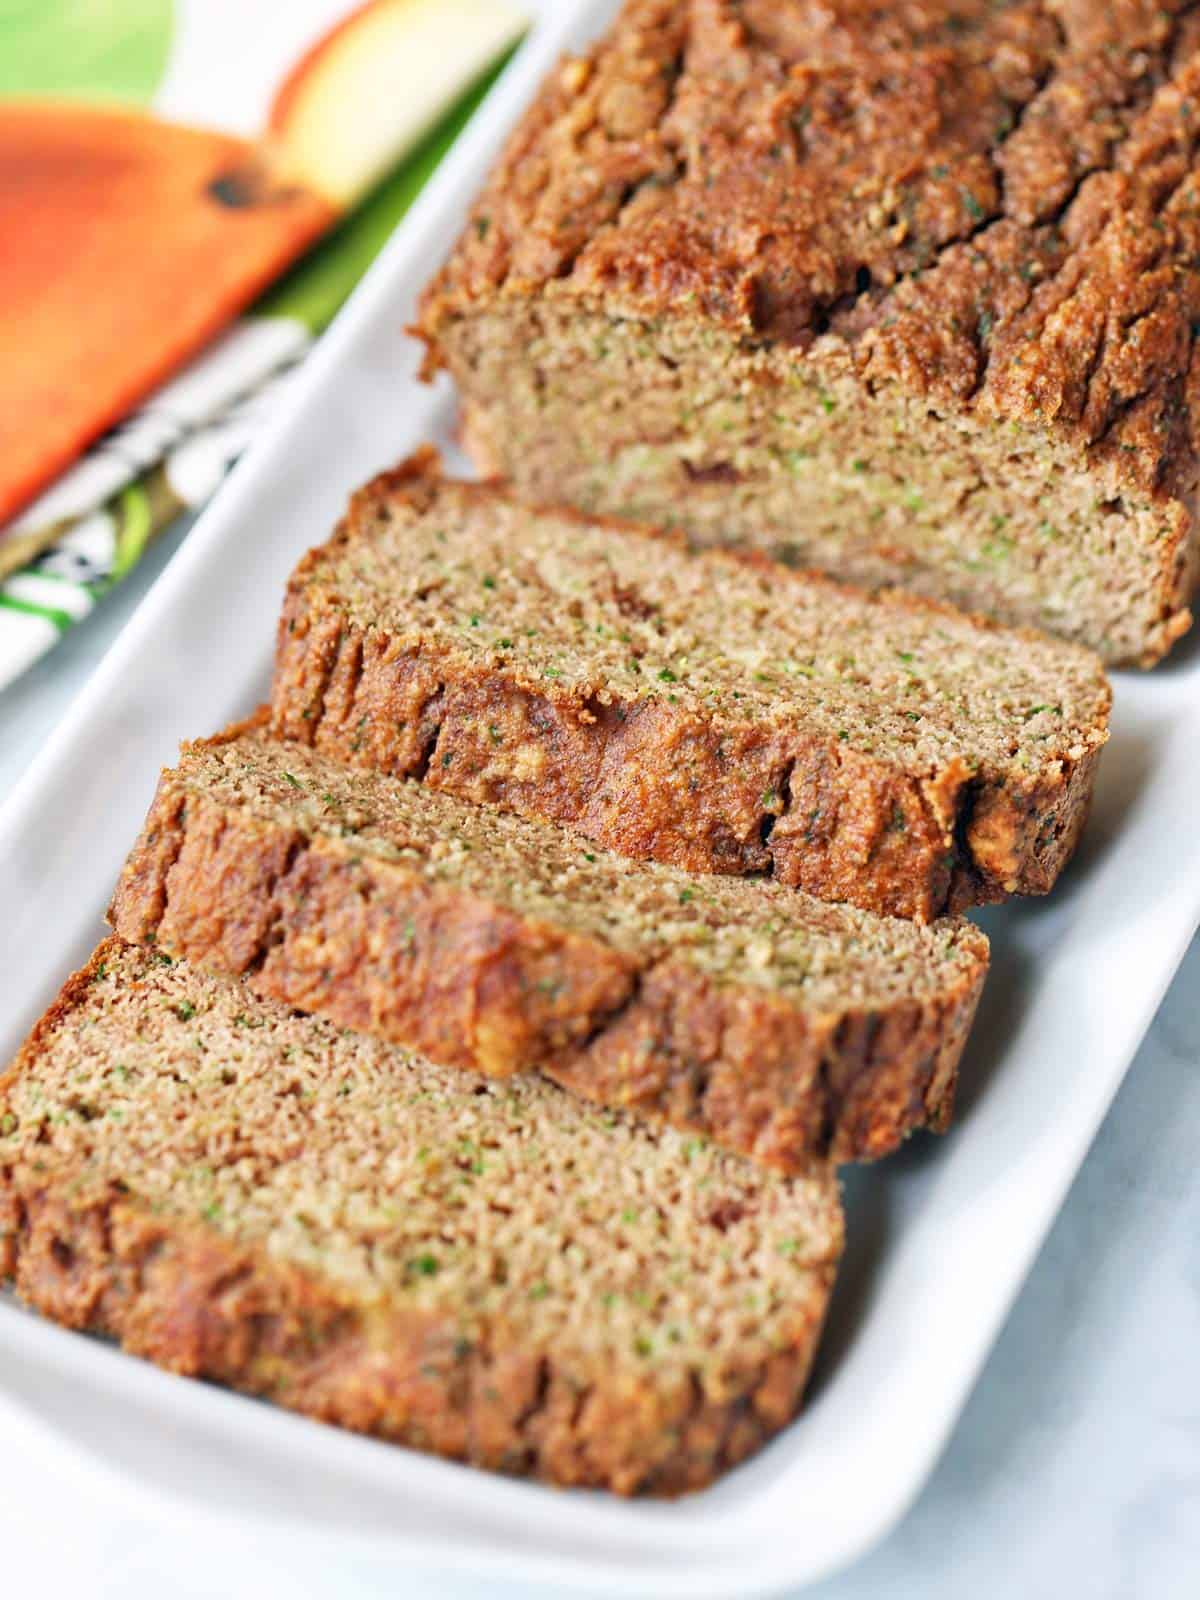 Sliced keto zucchini bread is served on a white serving tray.